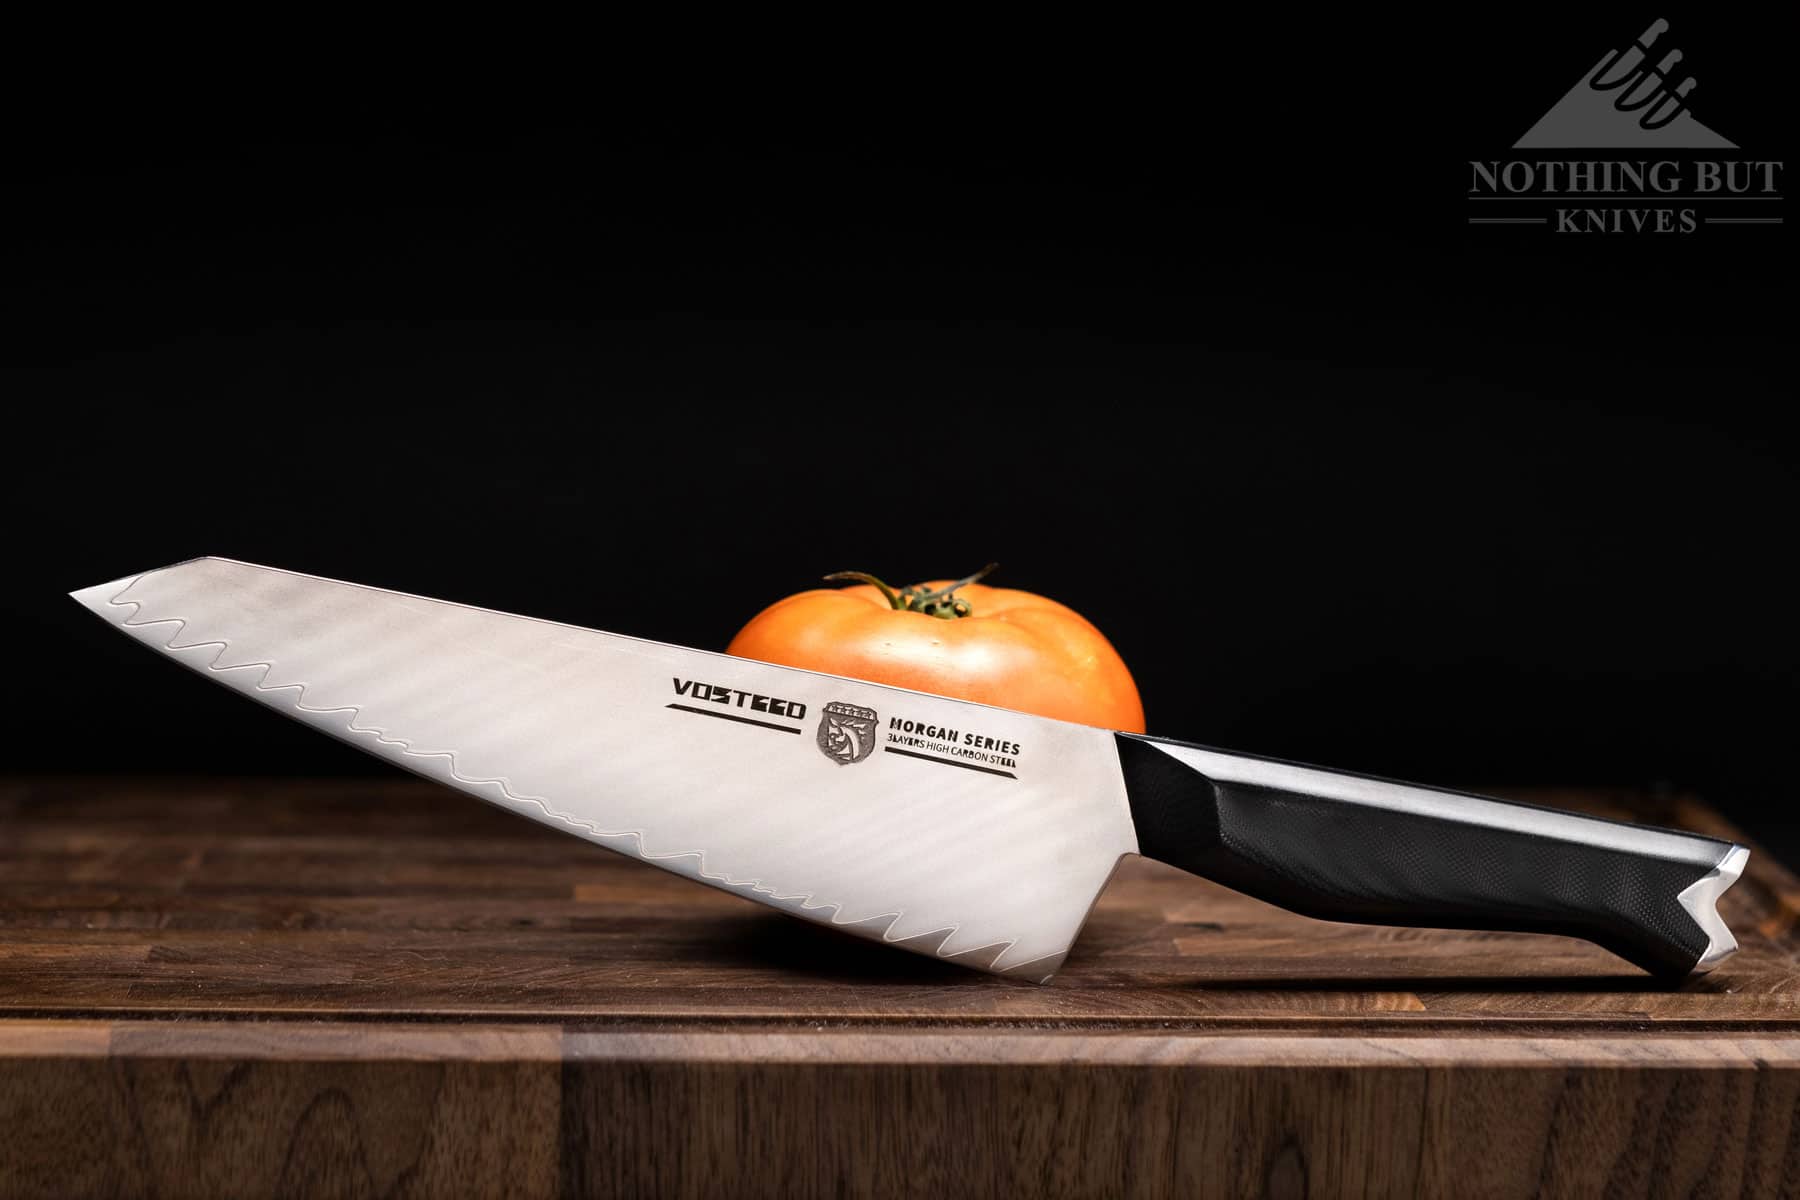 Shan Zu Chef Knife Review - Chefs Resources